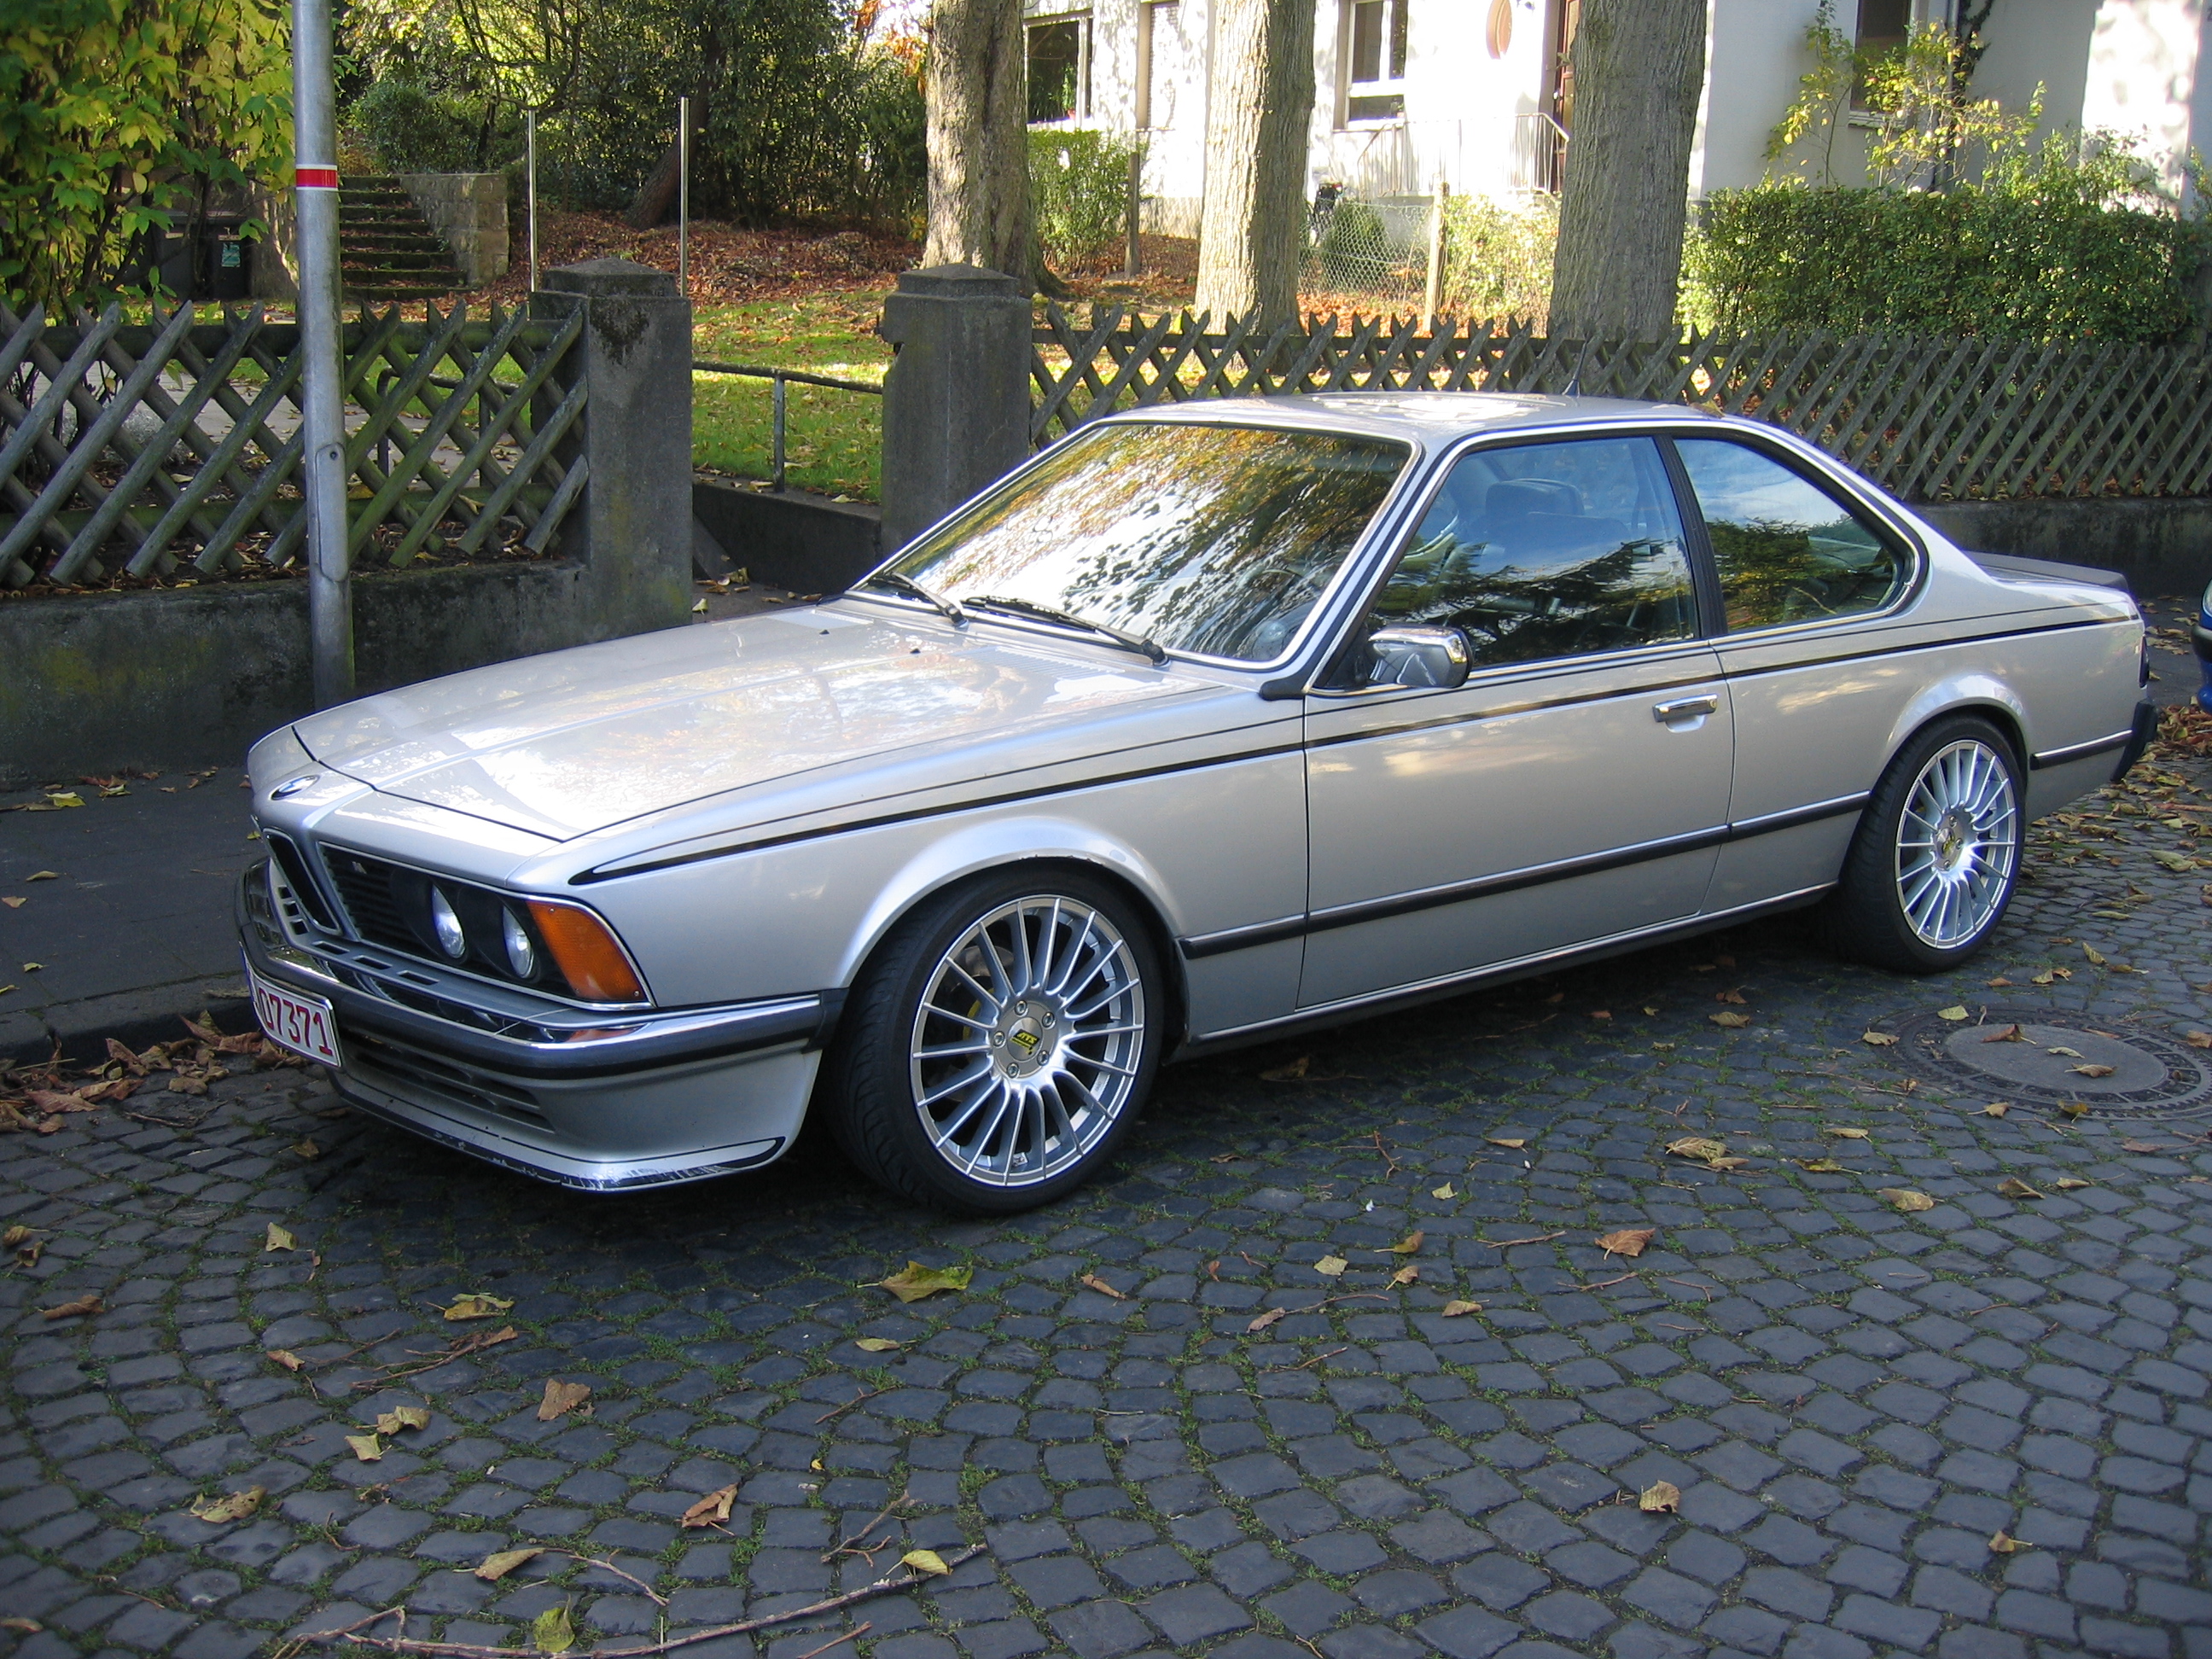 BMW 6 series E24 gallery and specs | Bimmerin